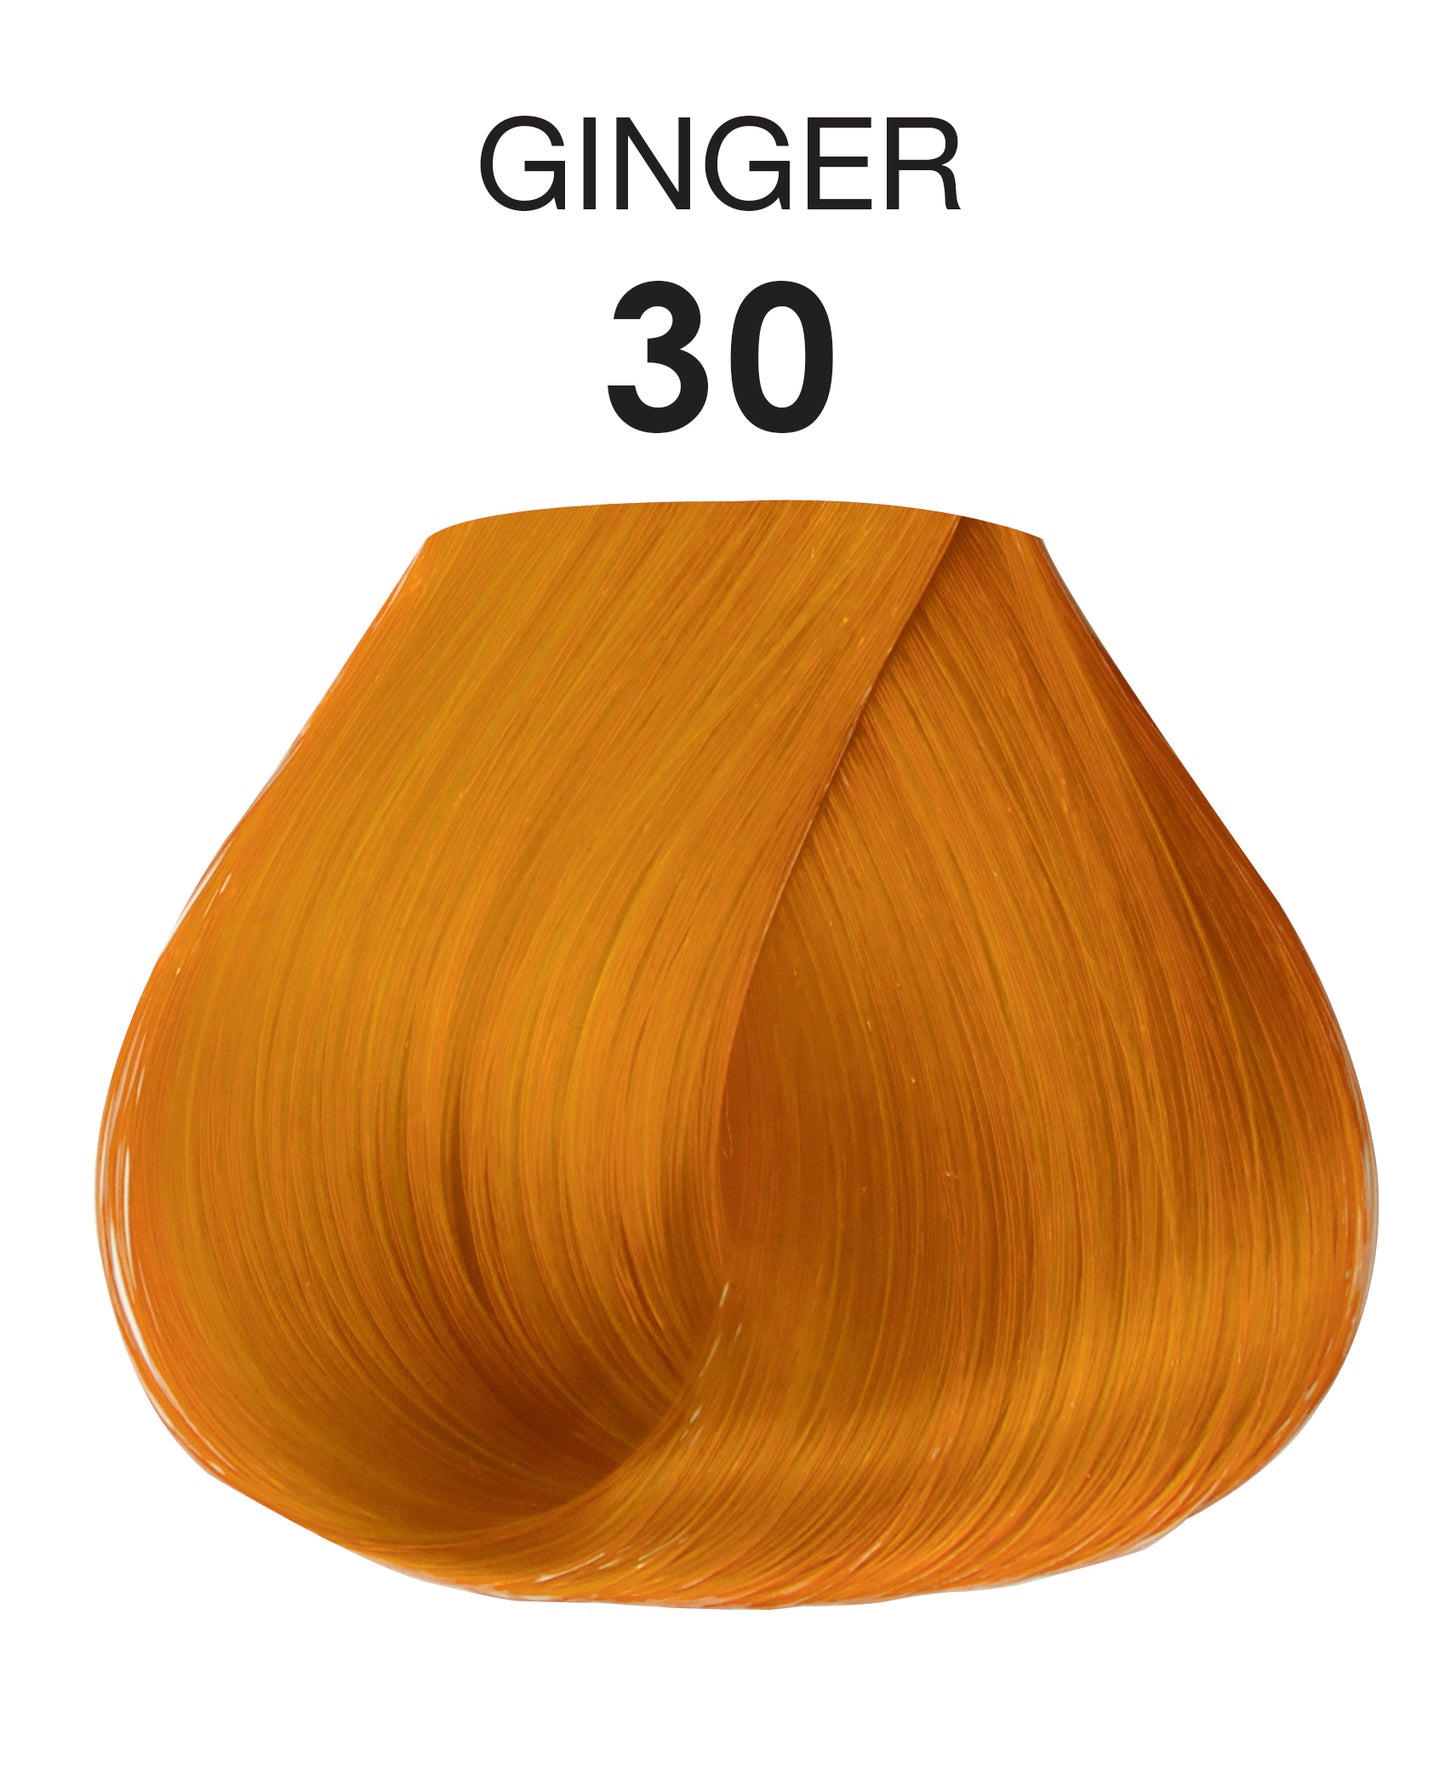 Adore #30 Ginger